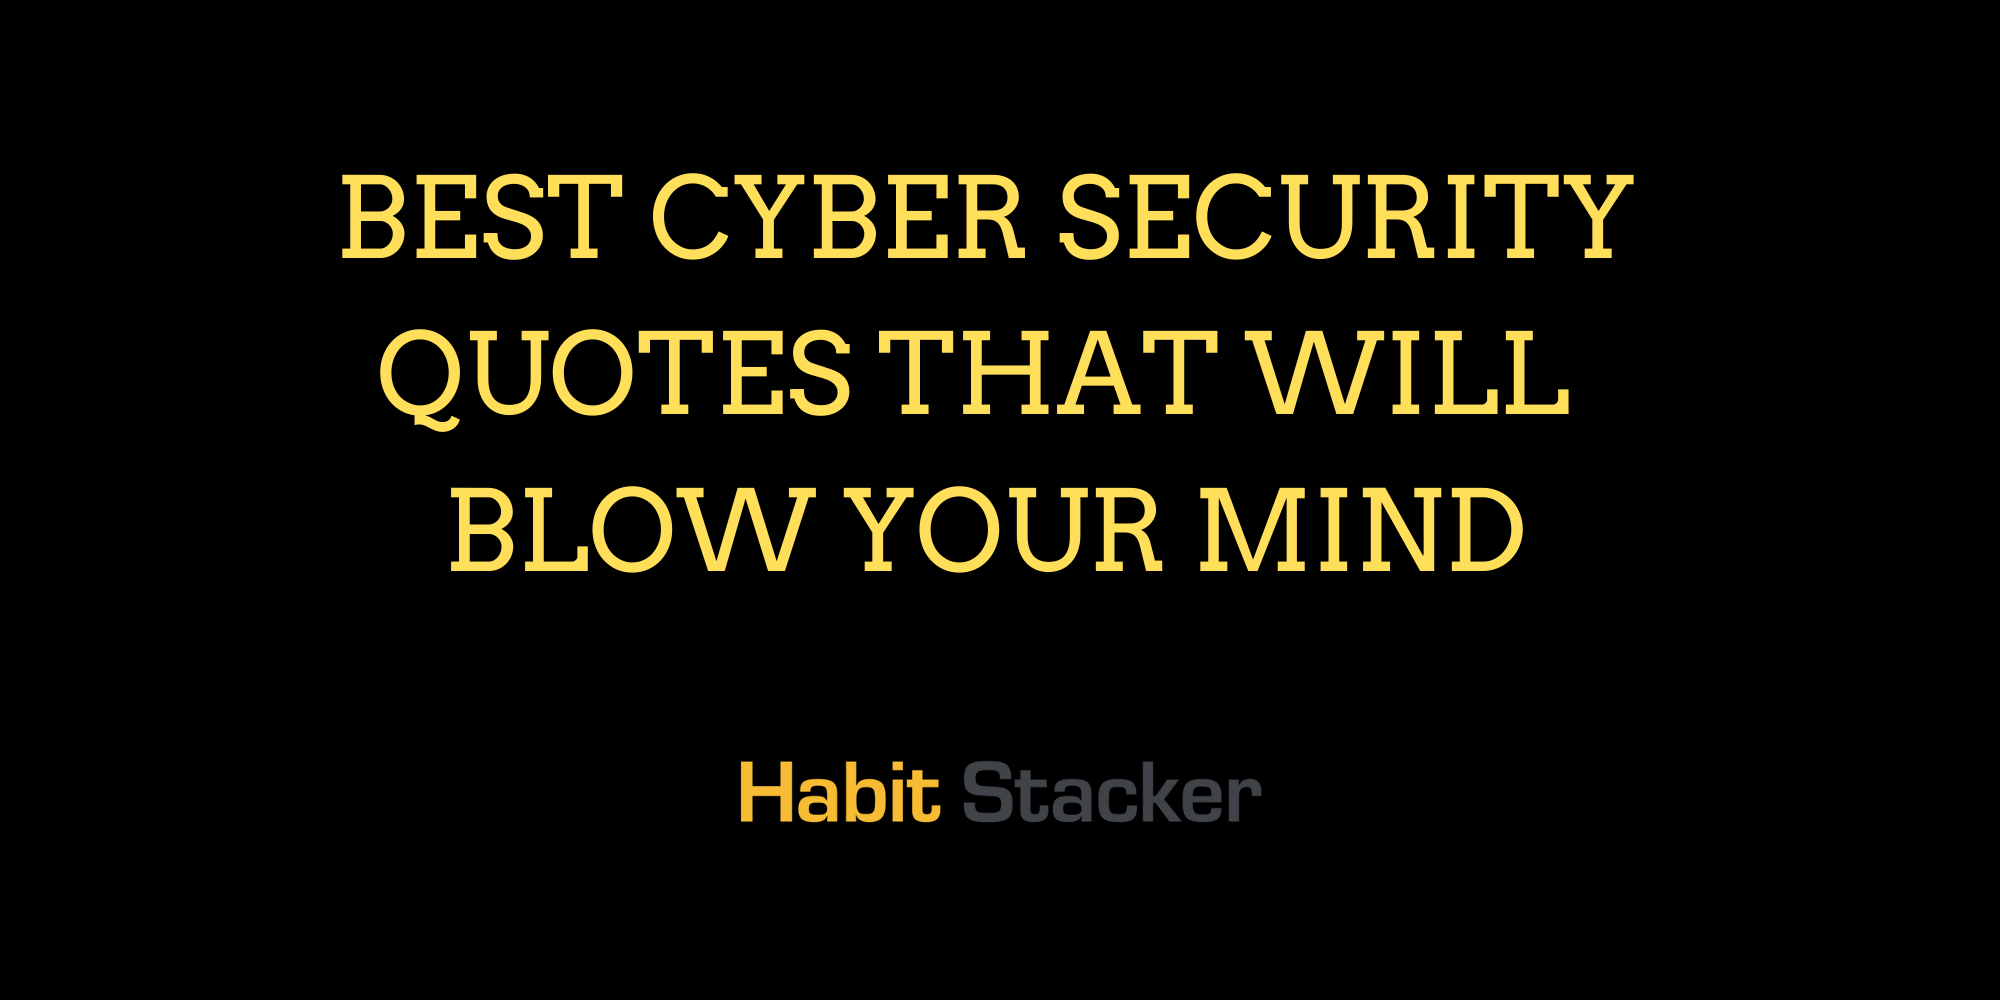 24 Best Cyber Security Quotes That Will Blow Your Mind Habit Stacker